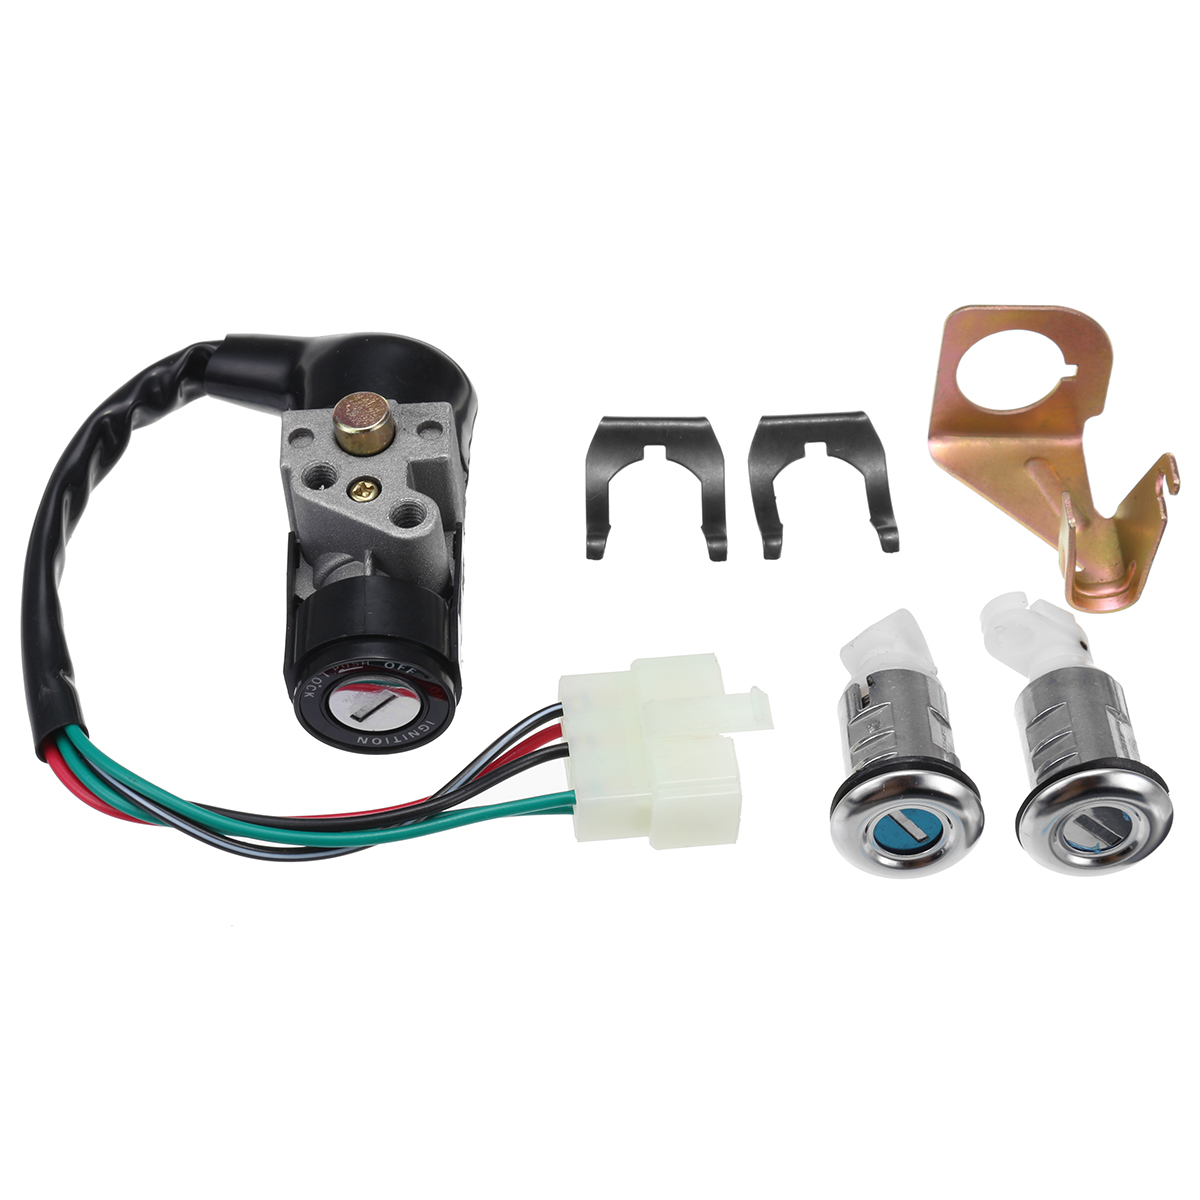 

Ignition Switch Key Set 5 Wires For 150cc Roketa Jonway Moped Scooter Gy6 50cc